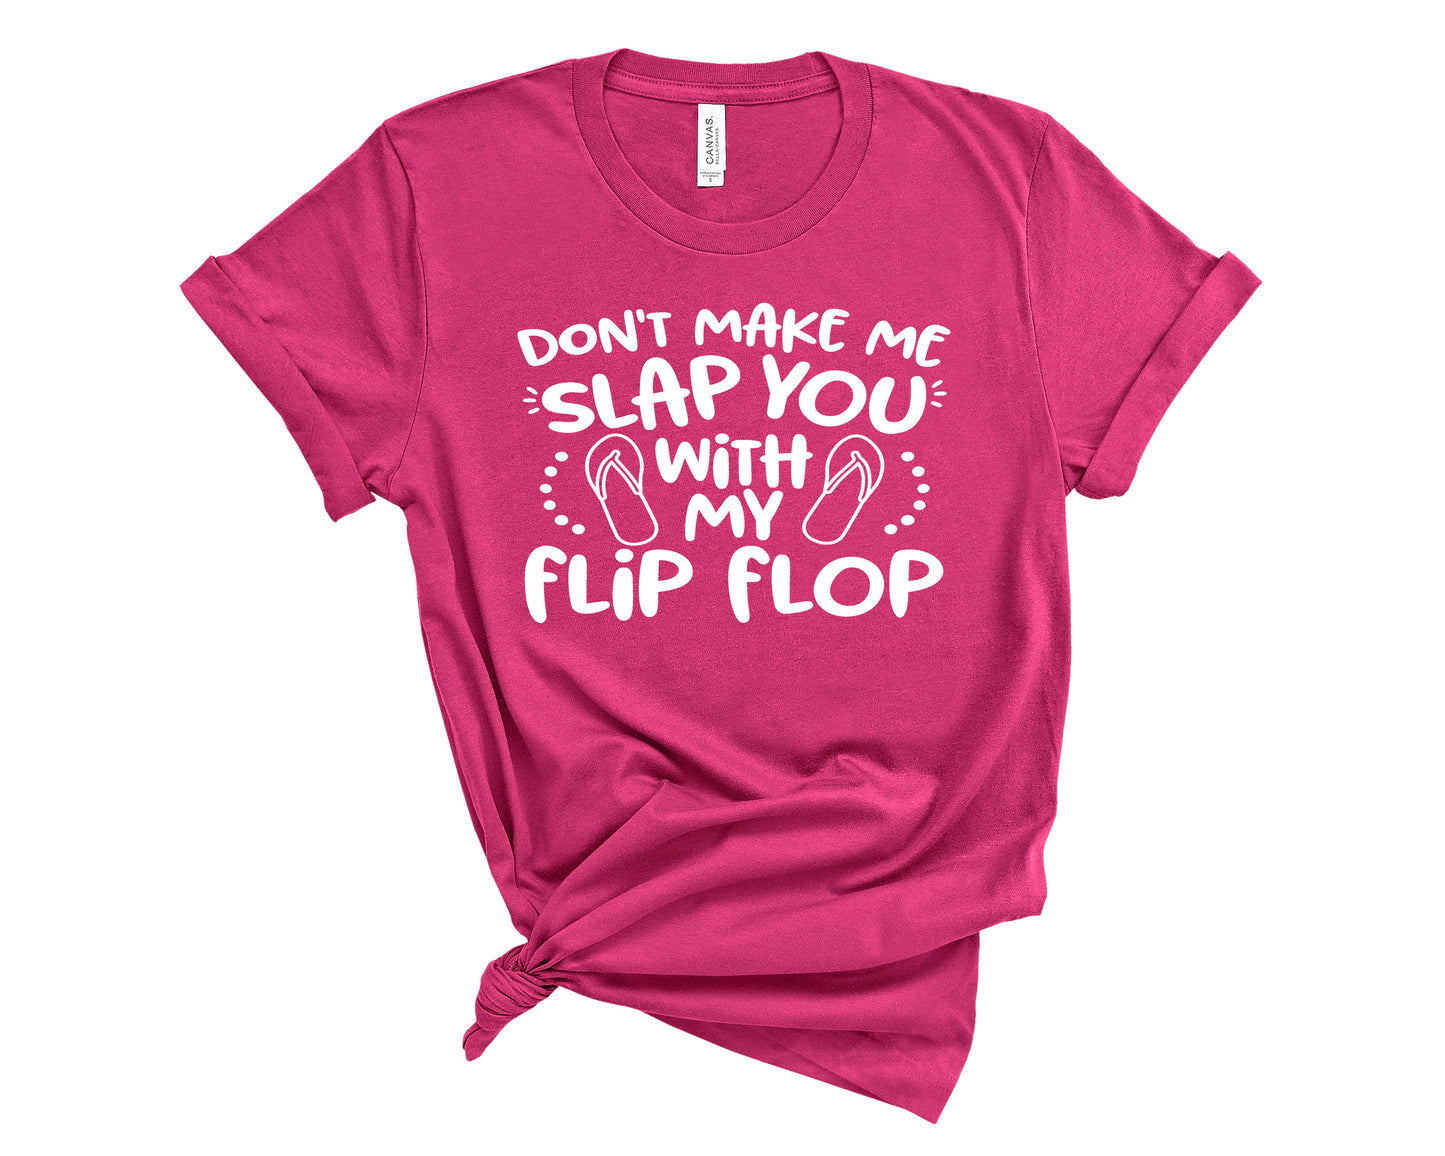 Don't make me slap you with my flip flop